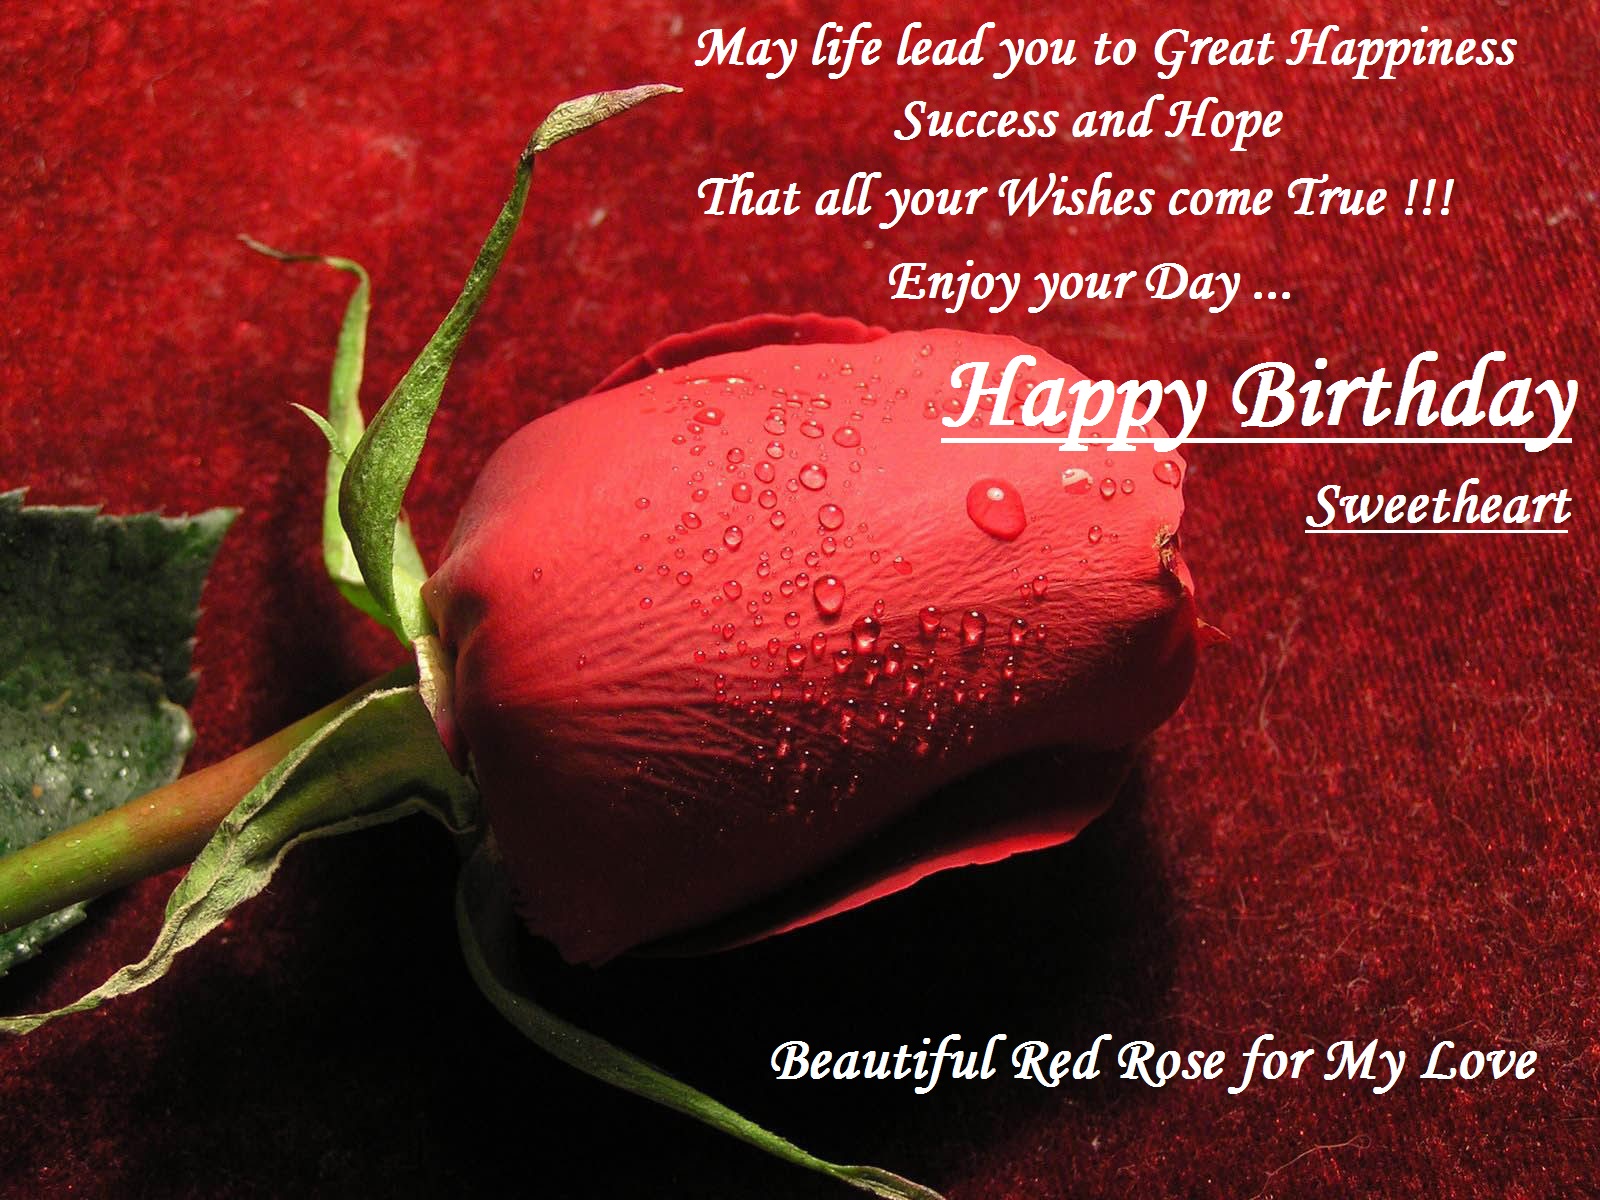 Red Rose for My Love, Wife, Sweetheart : Birthday Wishes - Festival ...